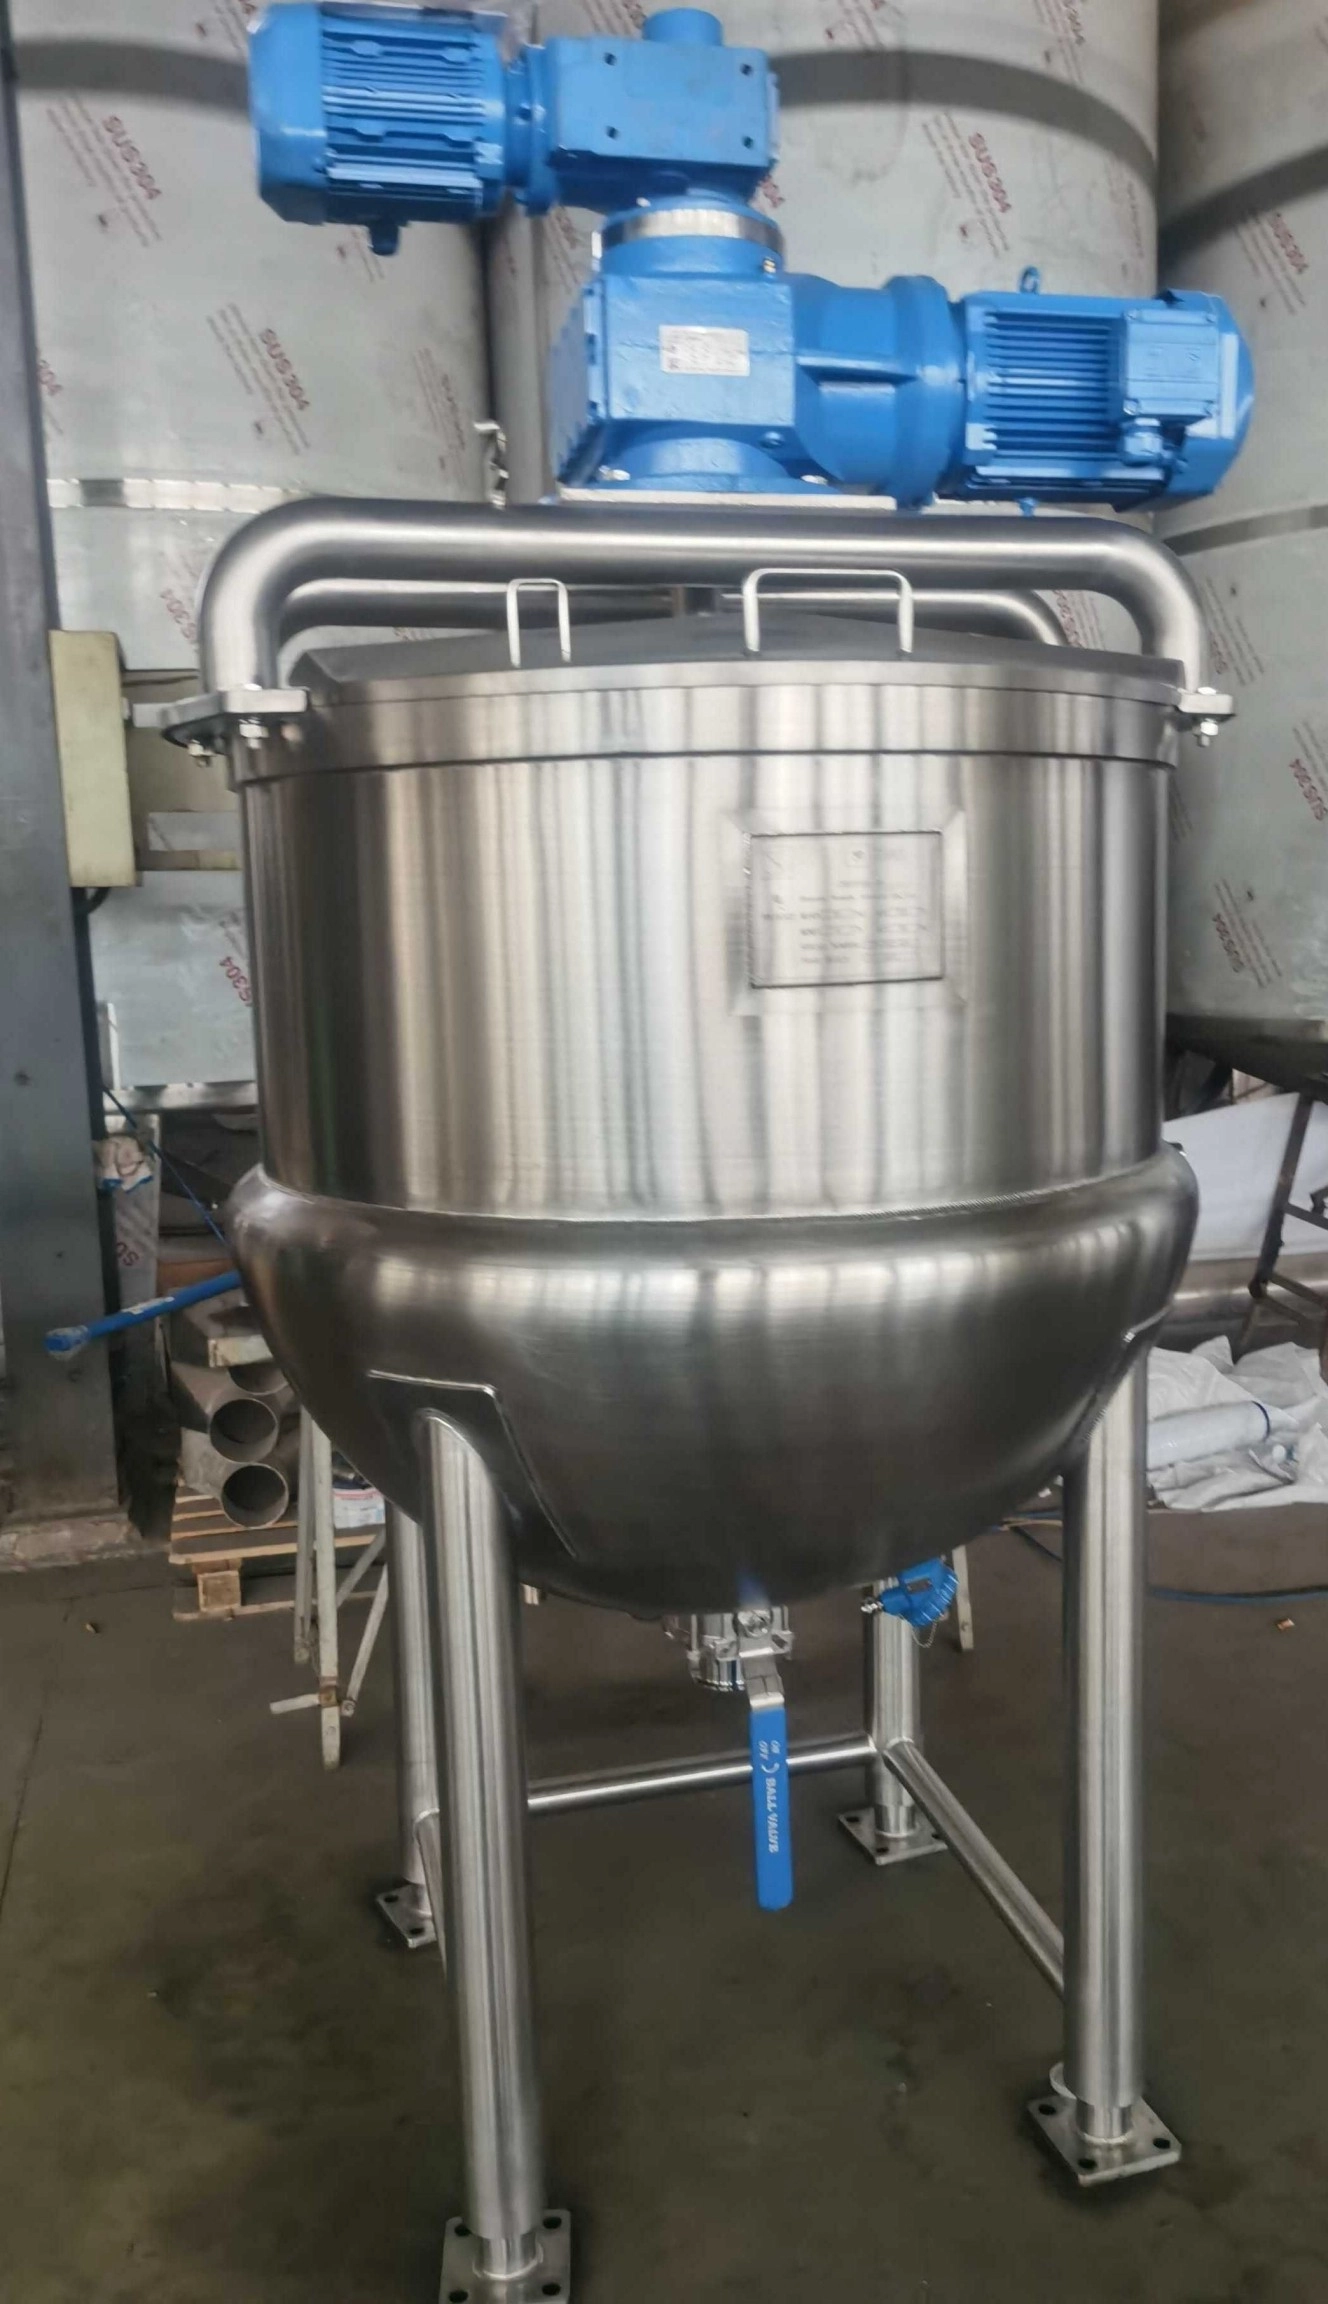 New 100 Gallon Stainless Steel Jacketed Kettle with Double Motion Scrape Agitation